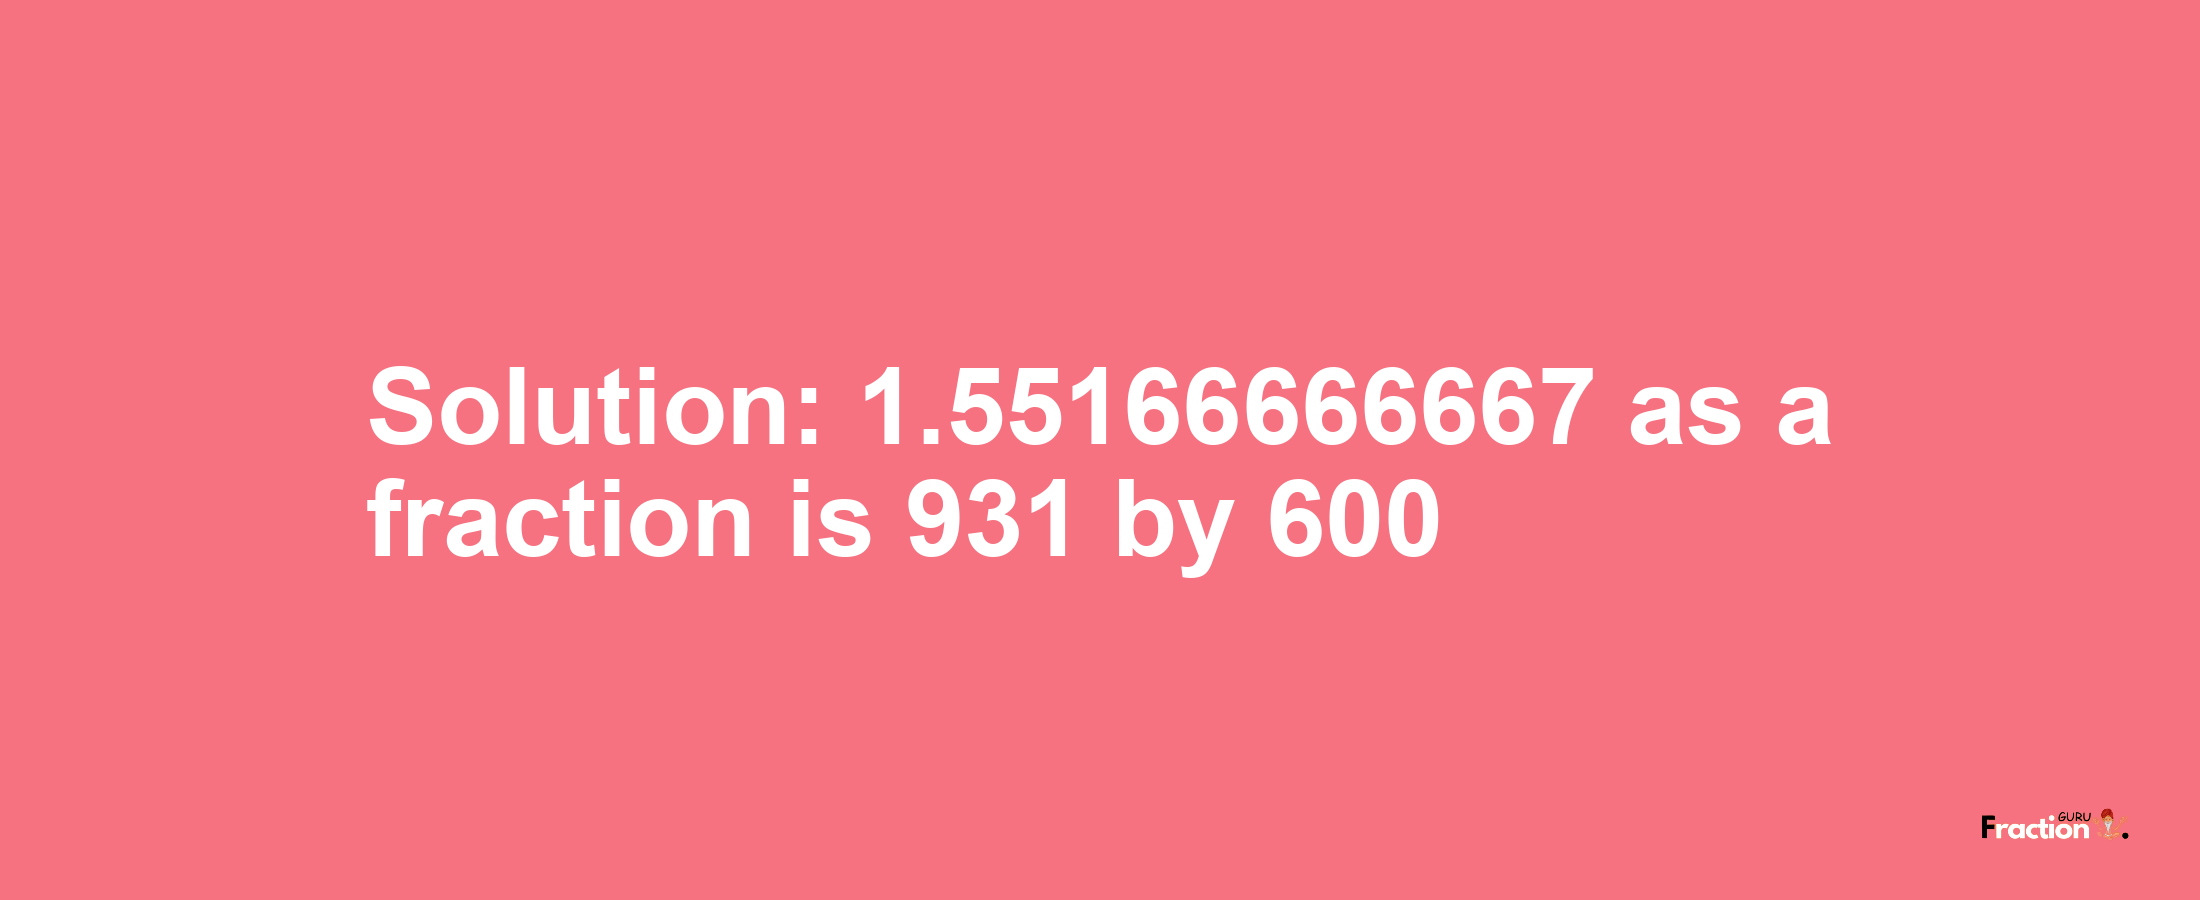 Solution:1.55166666667 as a fraction is 931/600